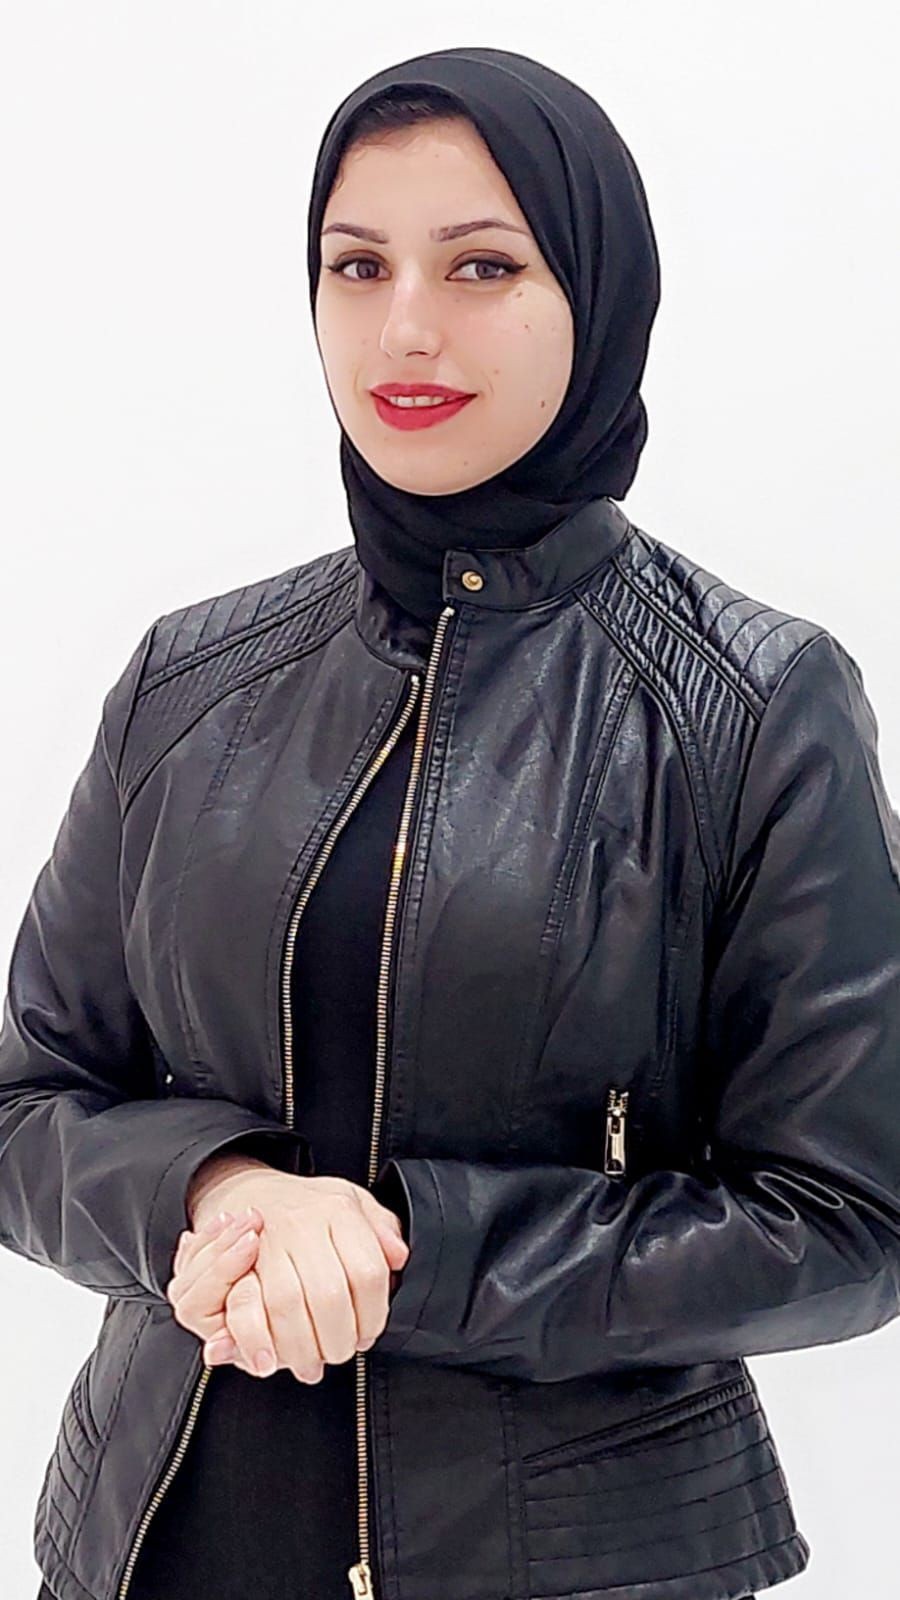 Manar Khedr: Clinical Psychologist. MSc in Clinical Psychology, PhD in Psychology focusing on Addiction. Expert in mental health and addiction therapy.